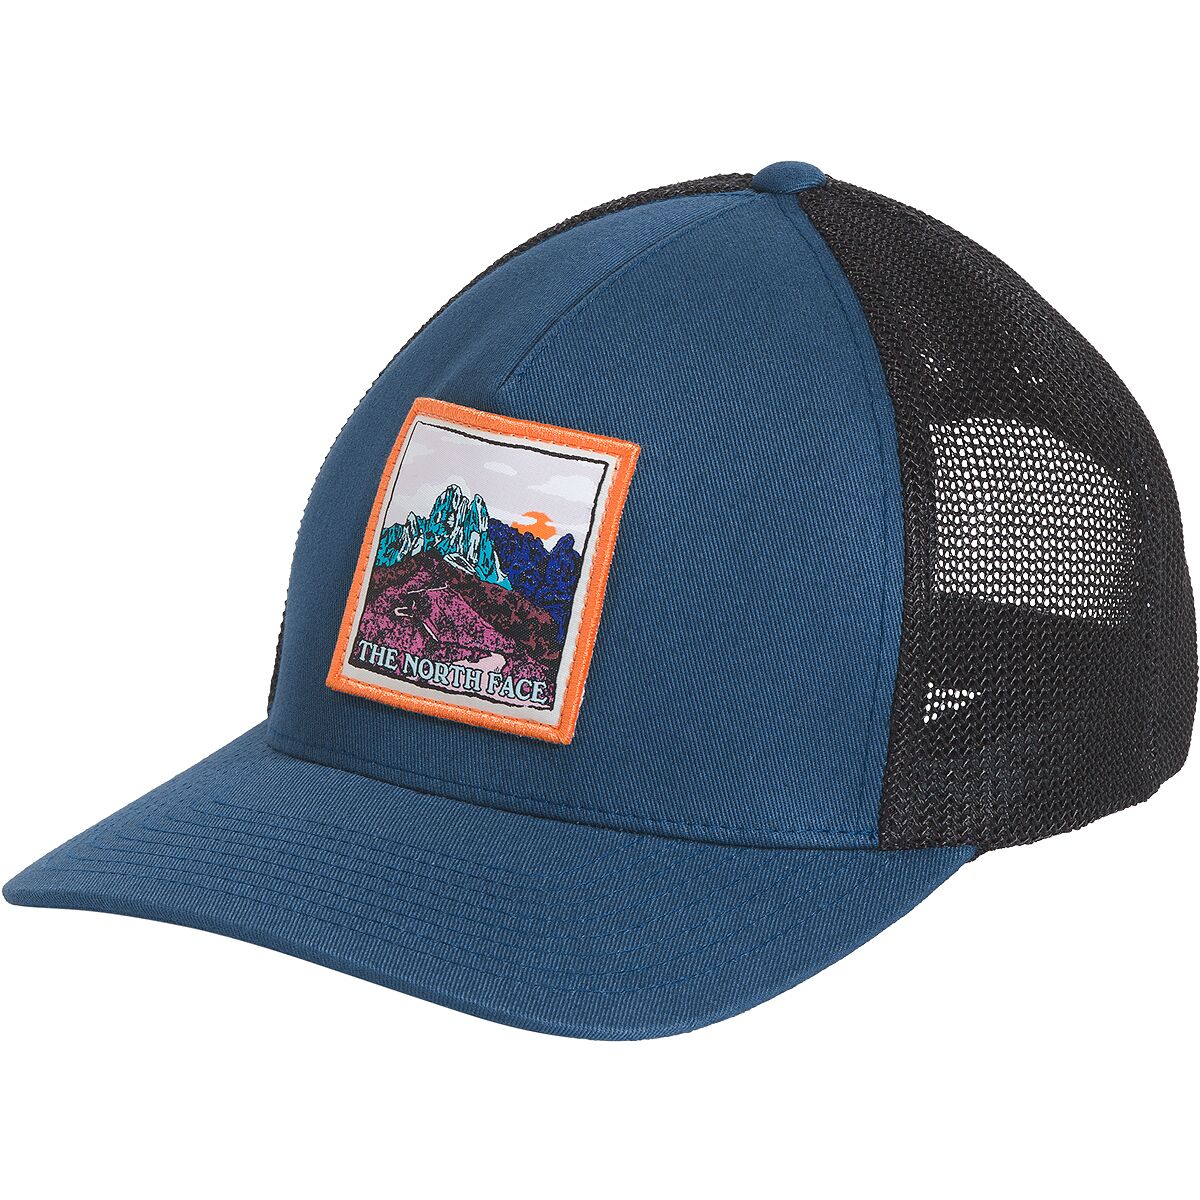 Keep It Patched Trucker Hat Big Adventure Outfitters